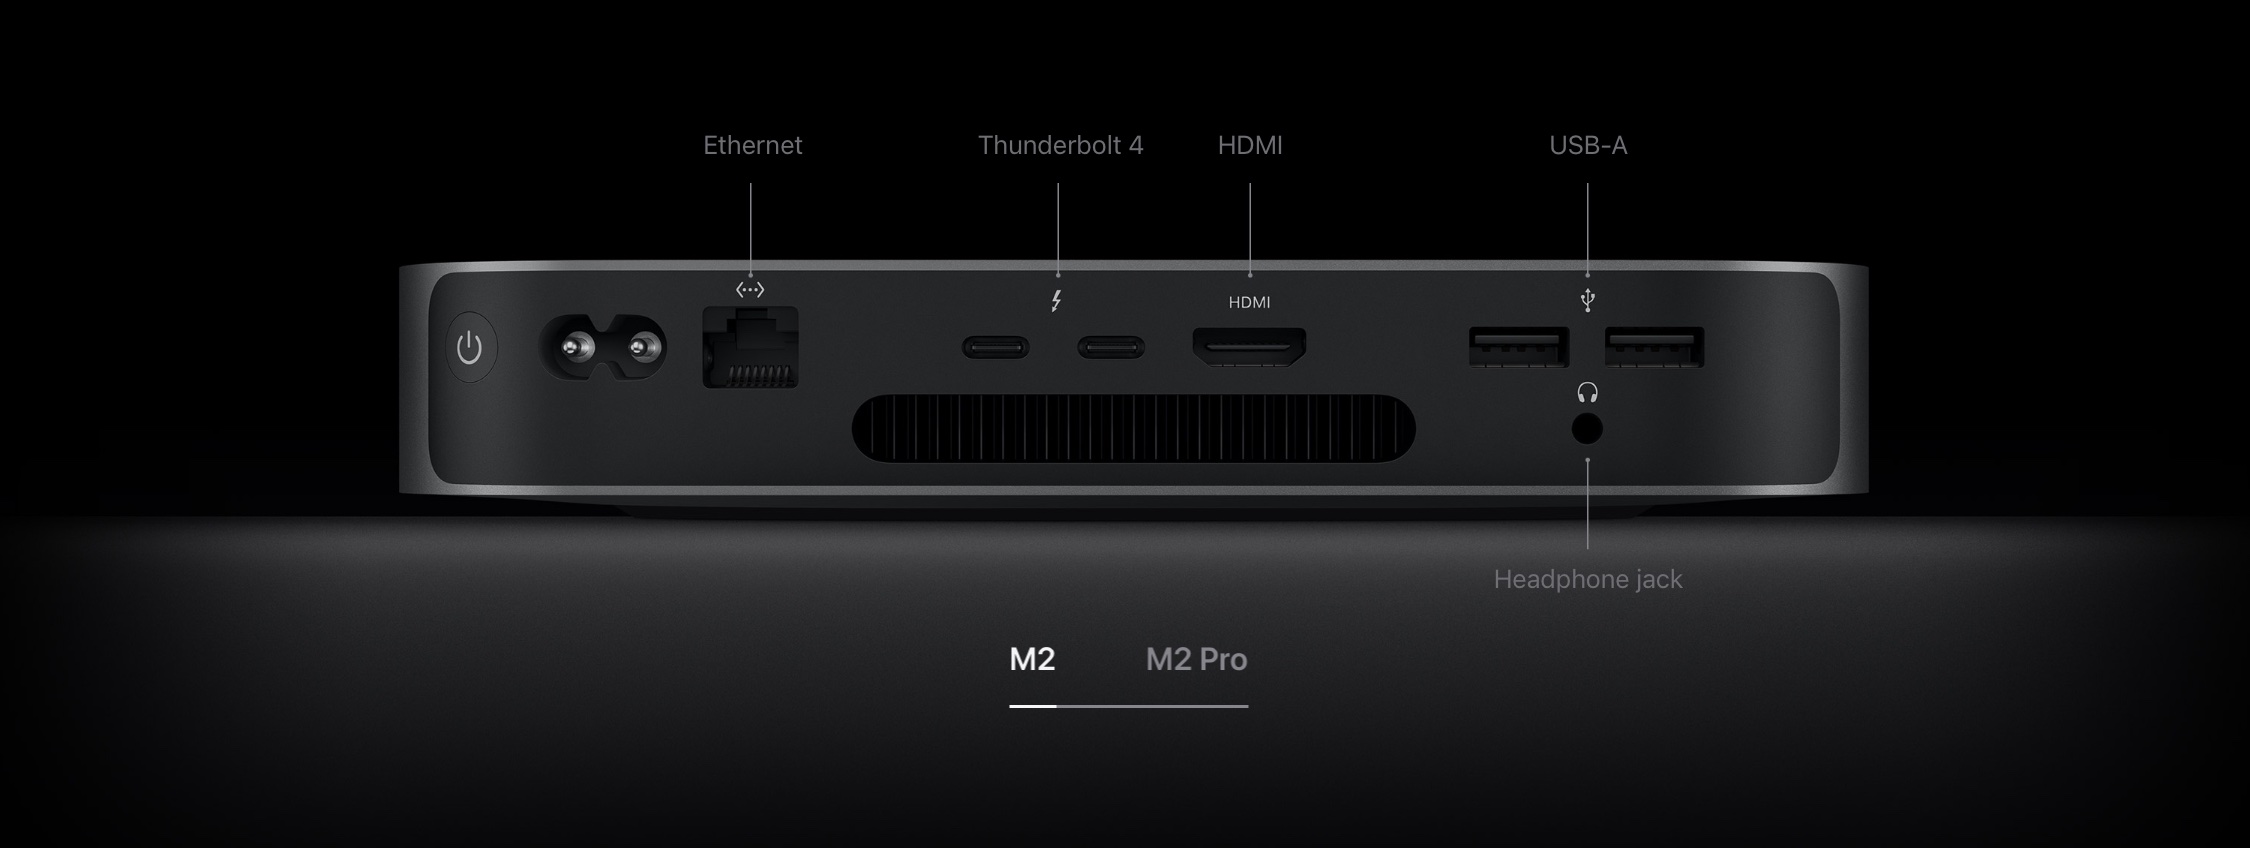 Mac mini comparison: What’s different with the M2 and M2 Pro vs M1